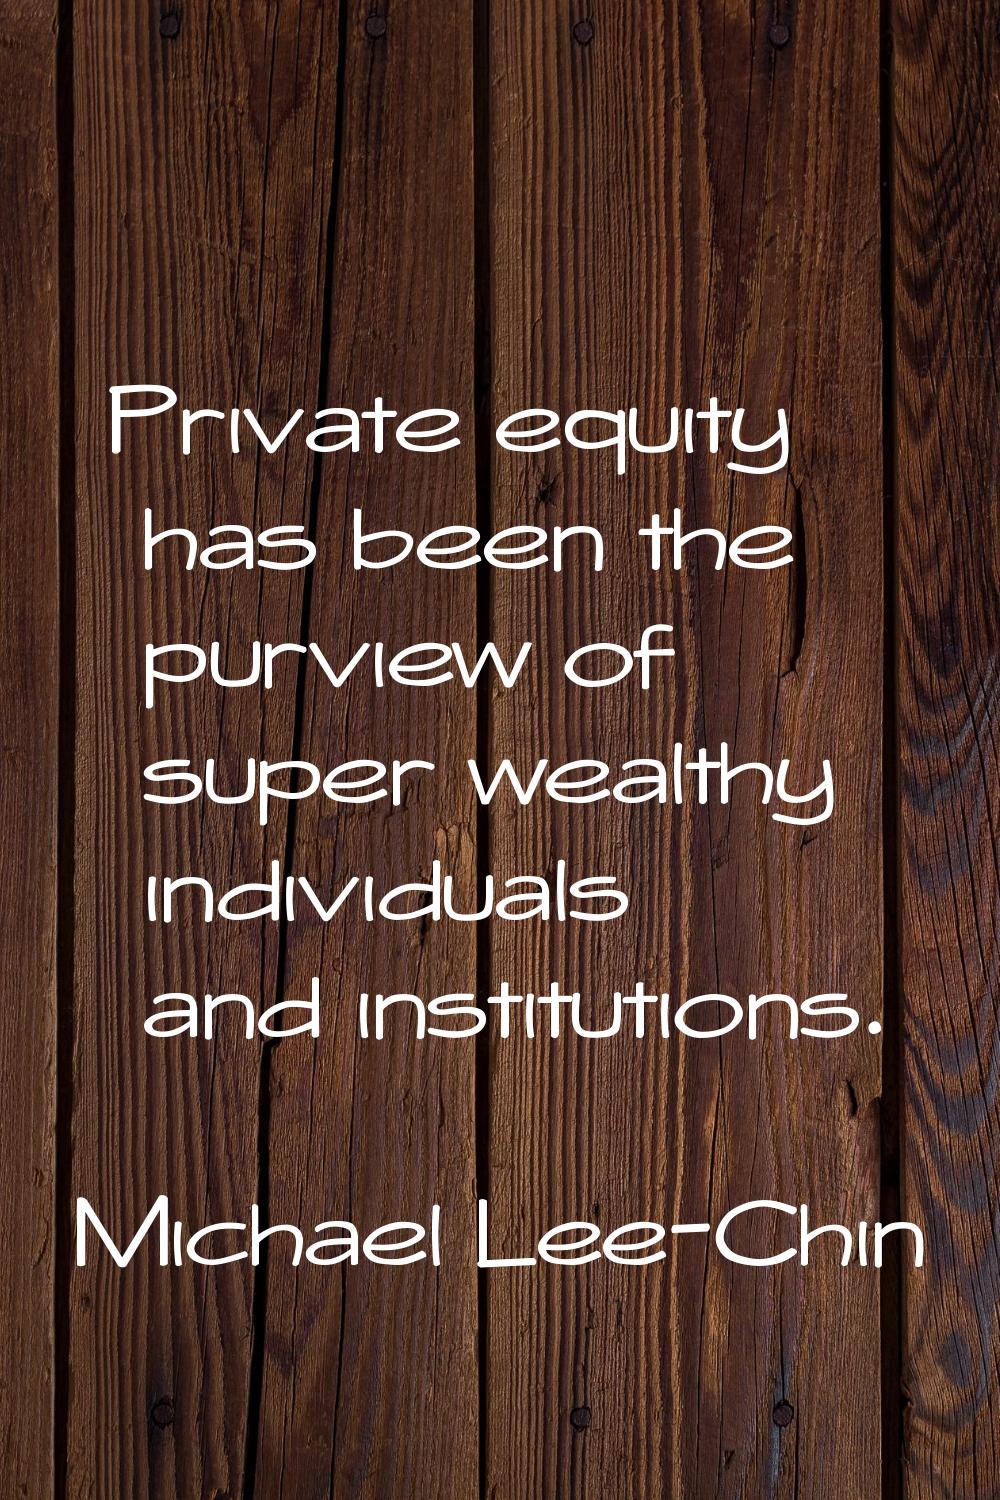 Private equity has been the purview of super wealthy individuals and institutions.